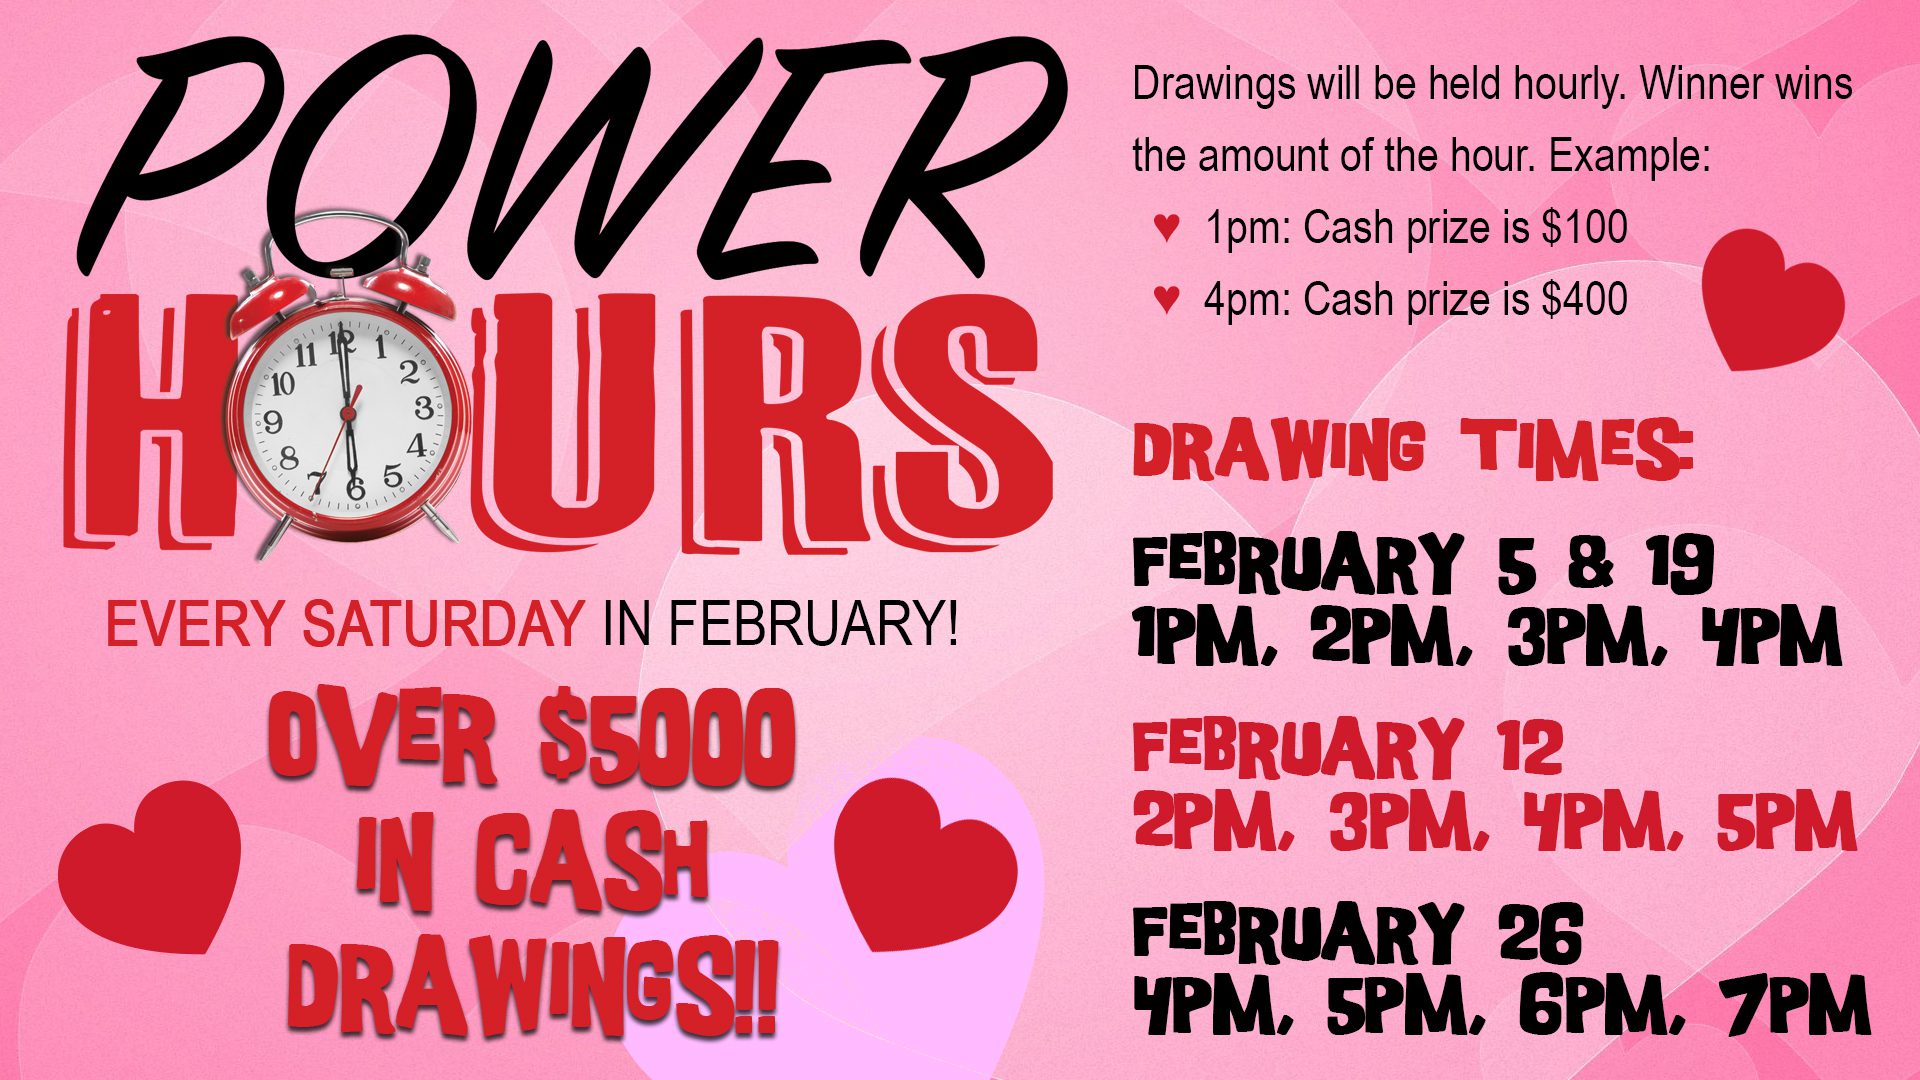 Promotional poster for power hours cash drawing event with schedule and prize details on a pink background with hearts and an alarm clock illustration.